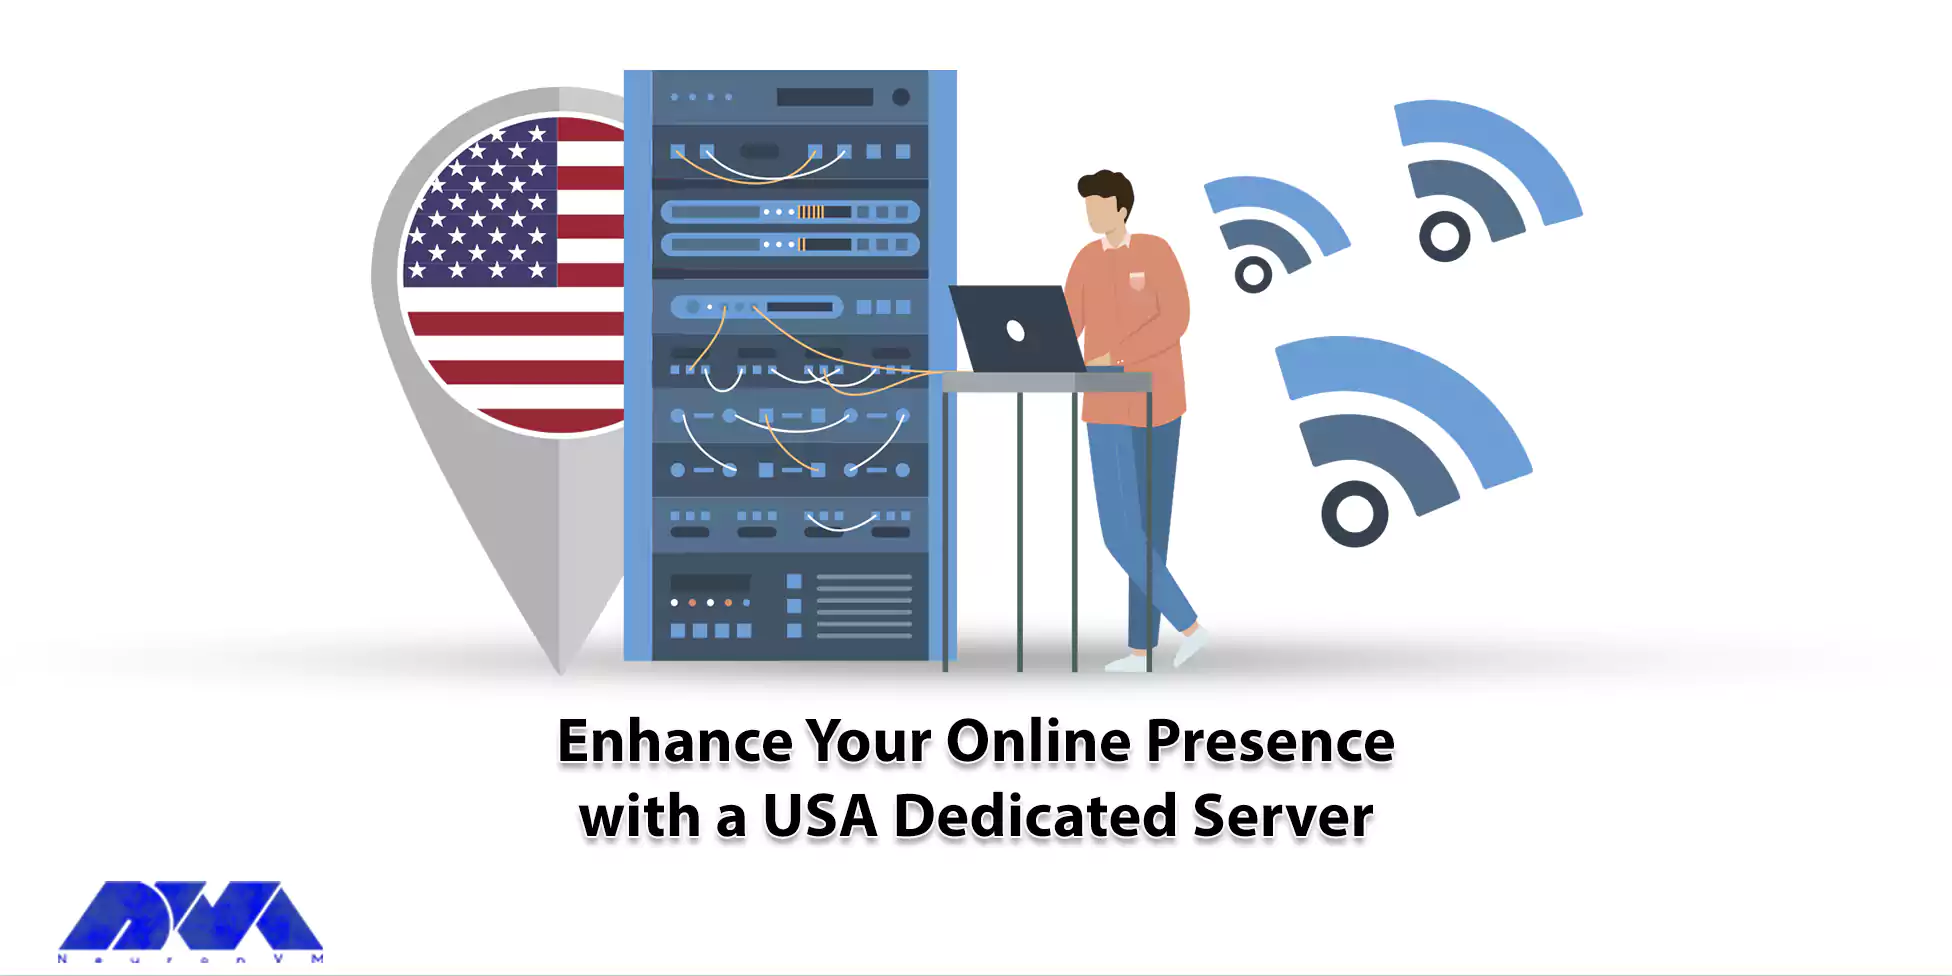 Enhance Your Online Presence with a USA Dedicated Server